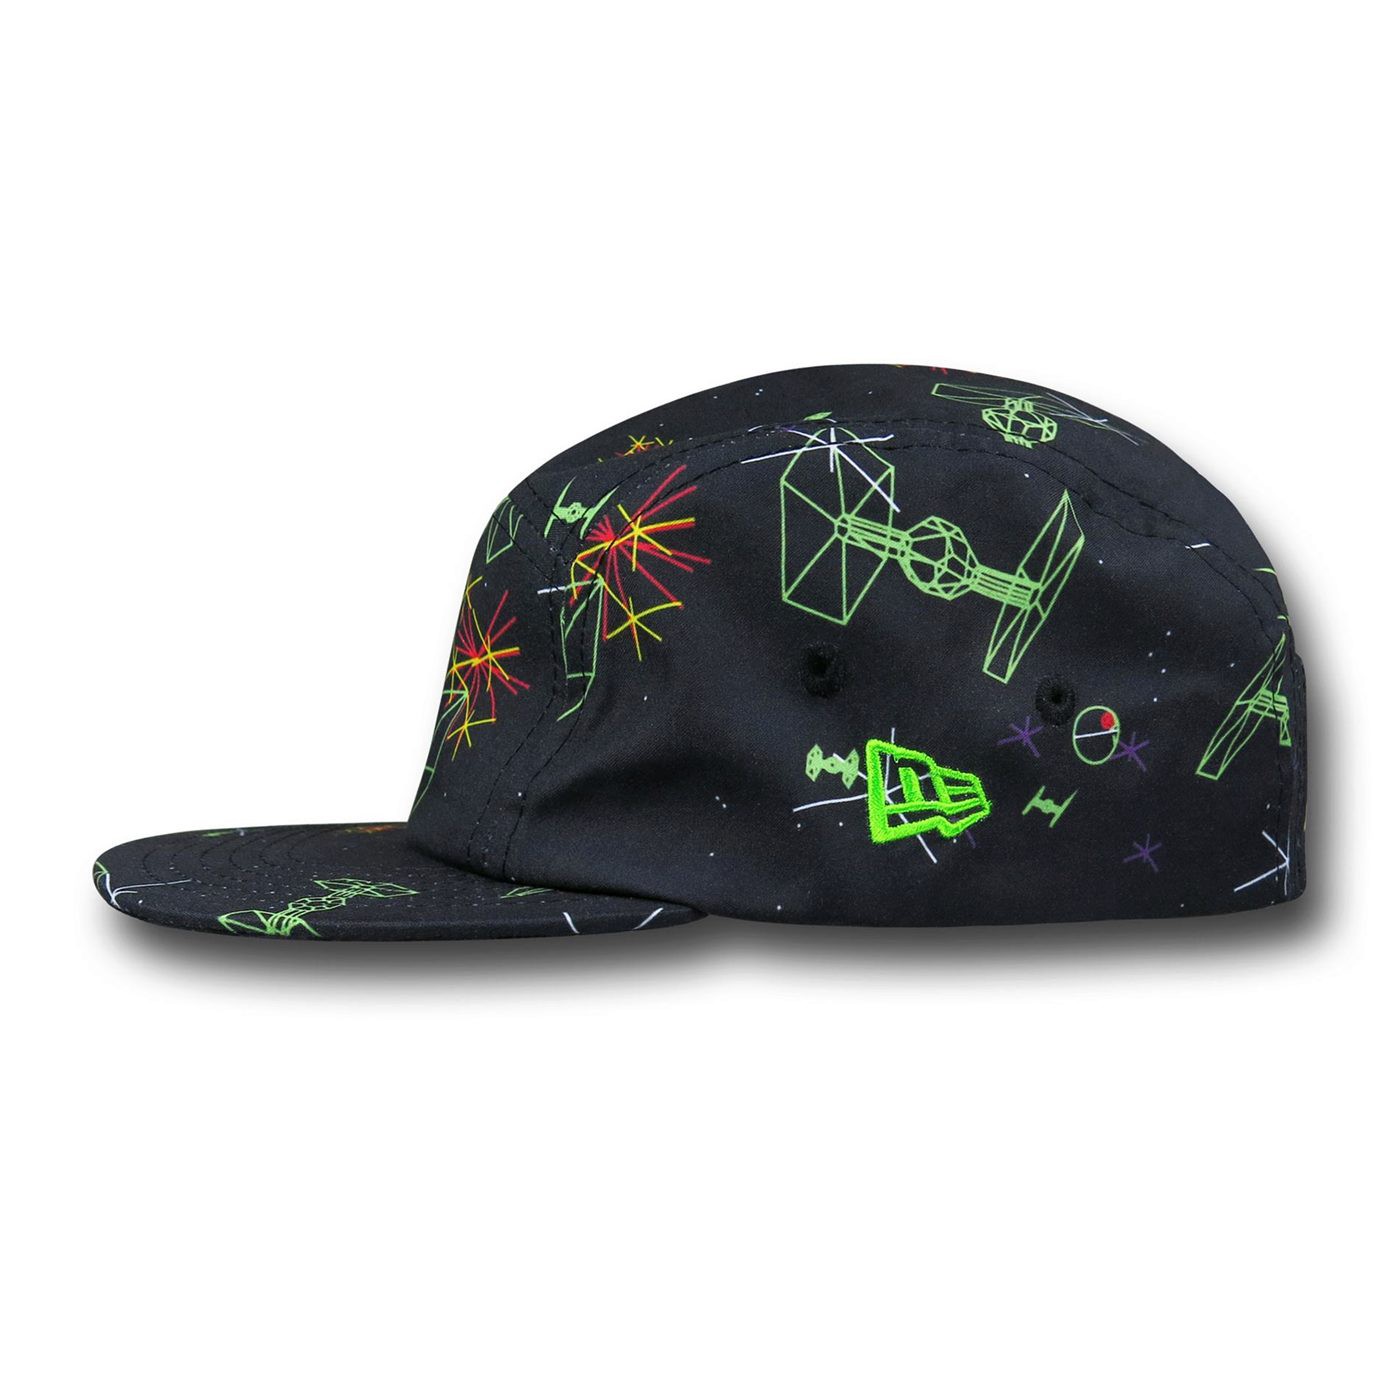 Star Wars Video Game Sublimated Cap